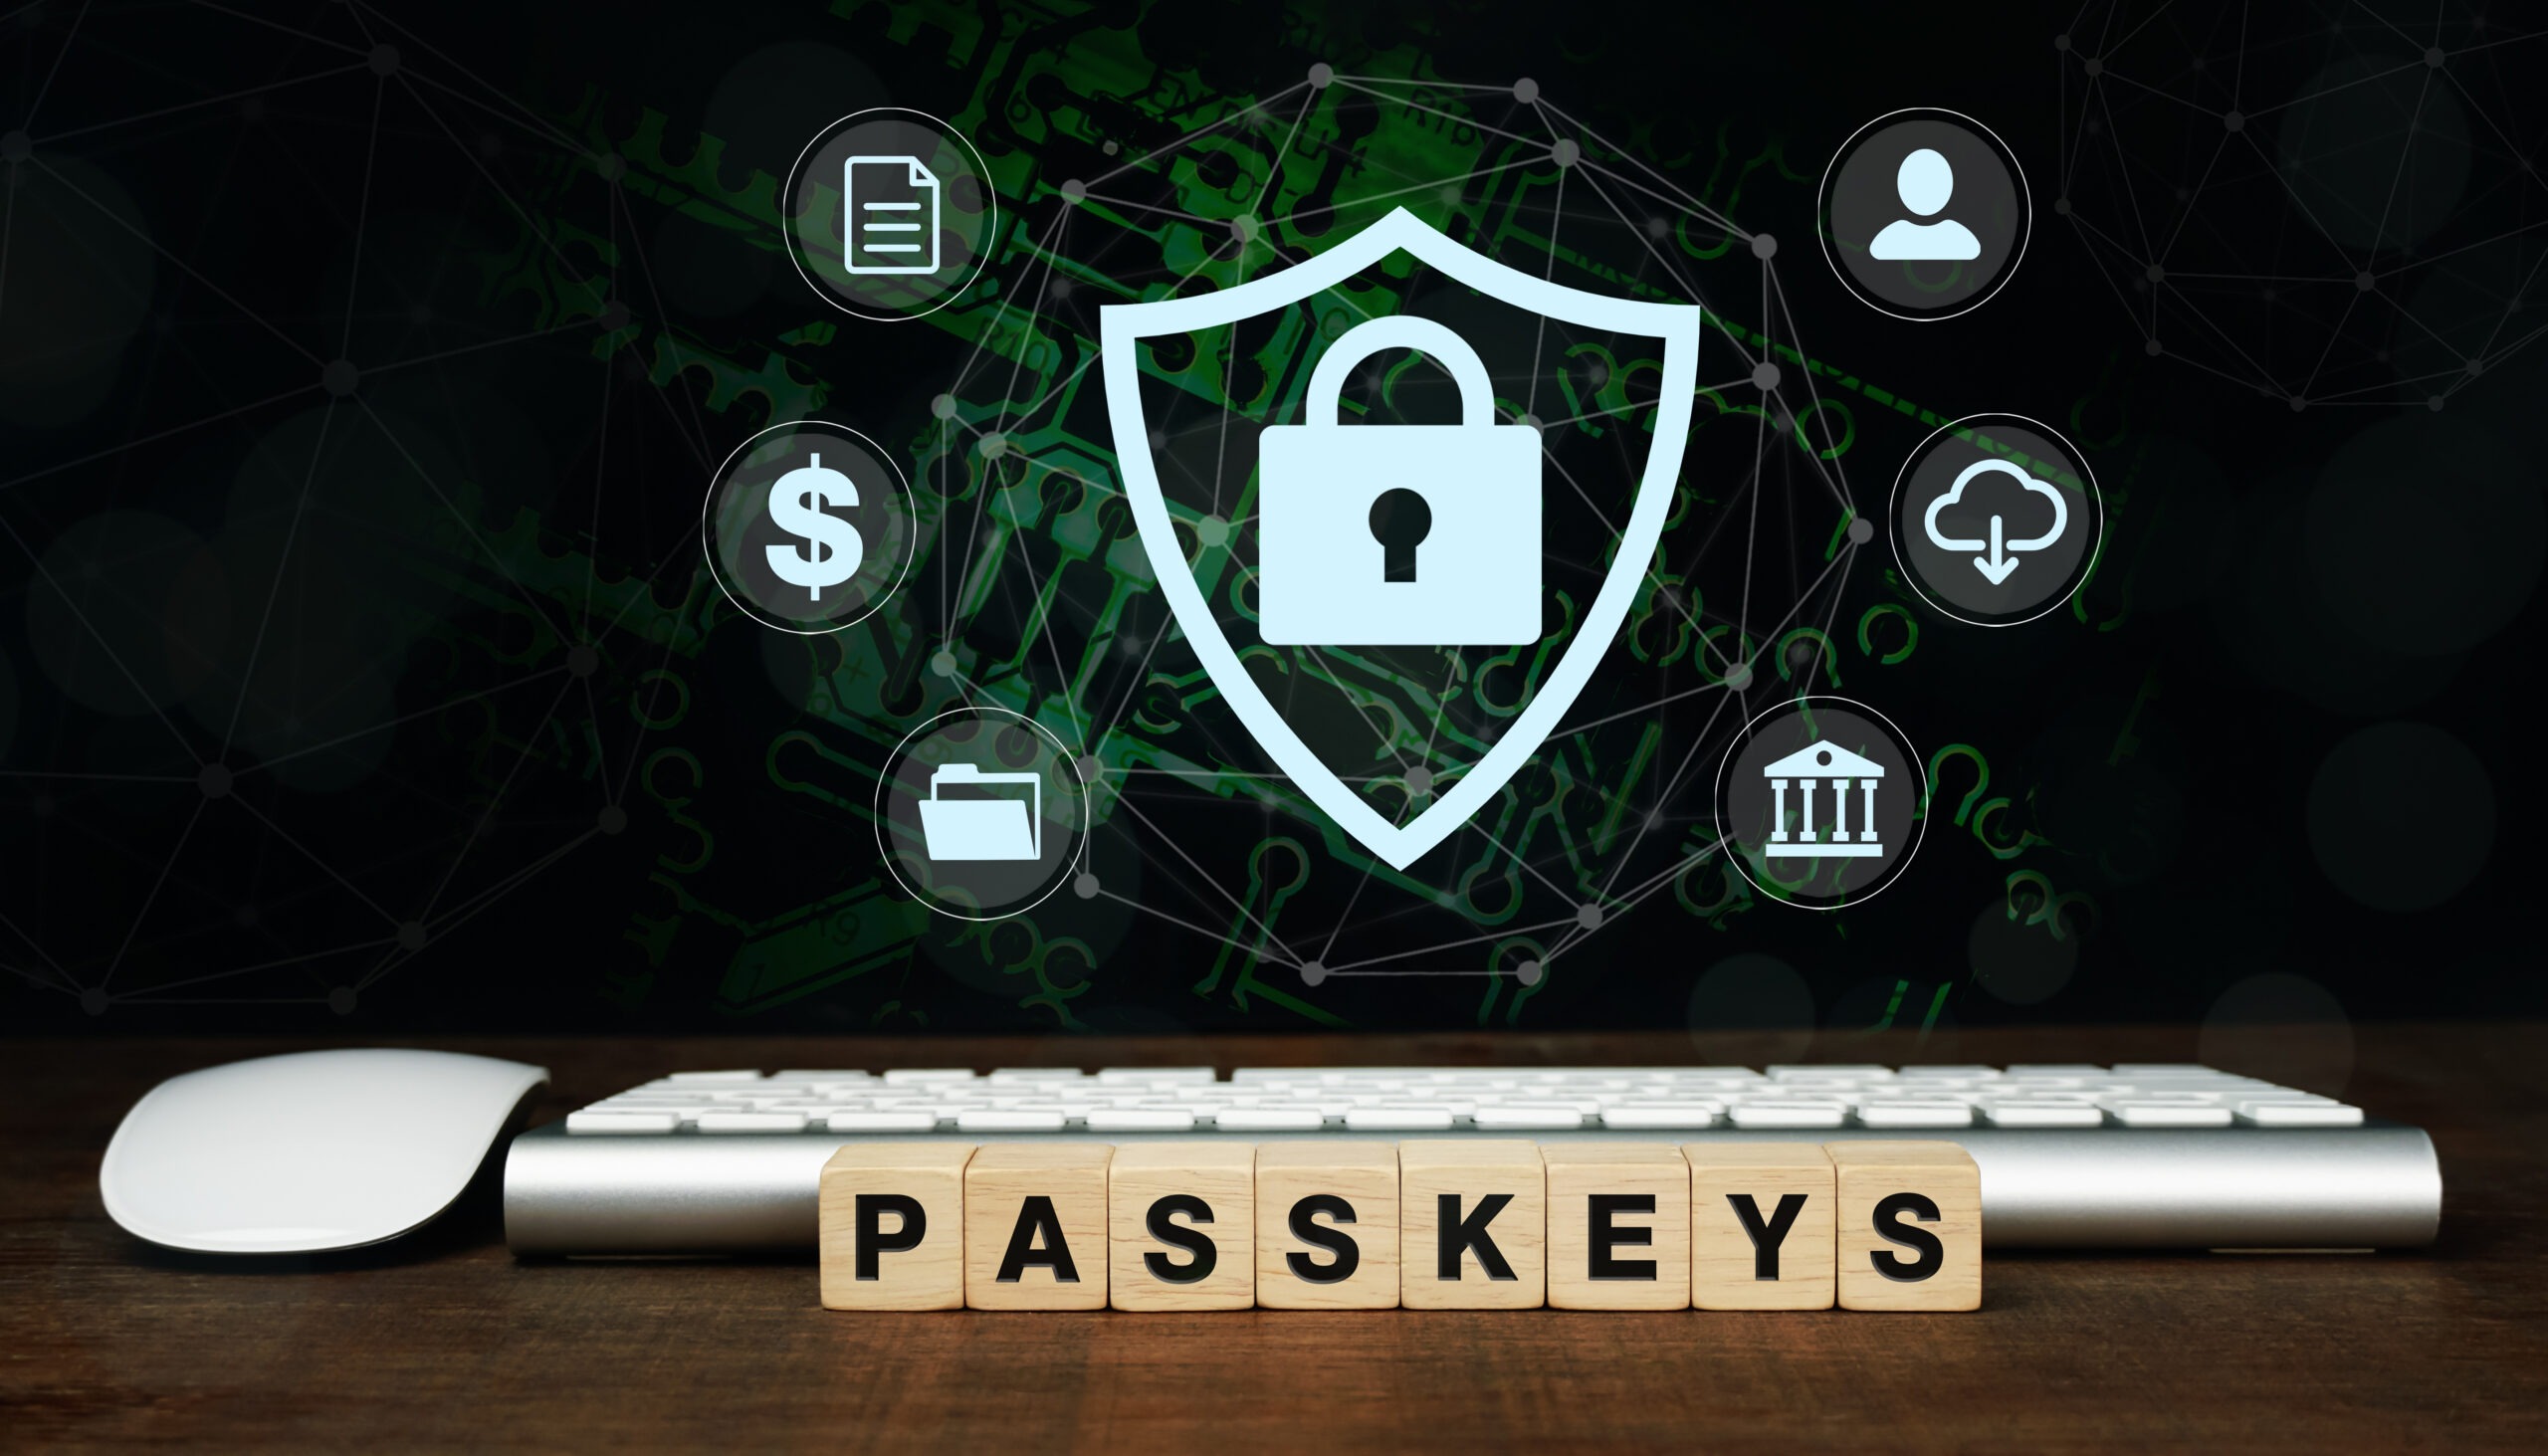 Using passkeys instead of passwords to maintain security